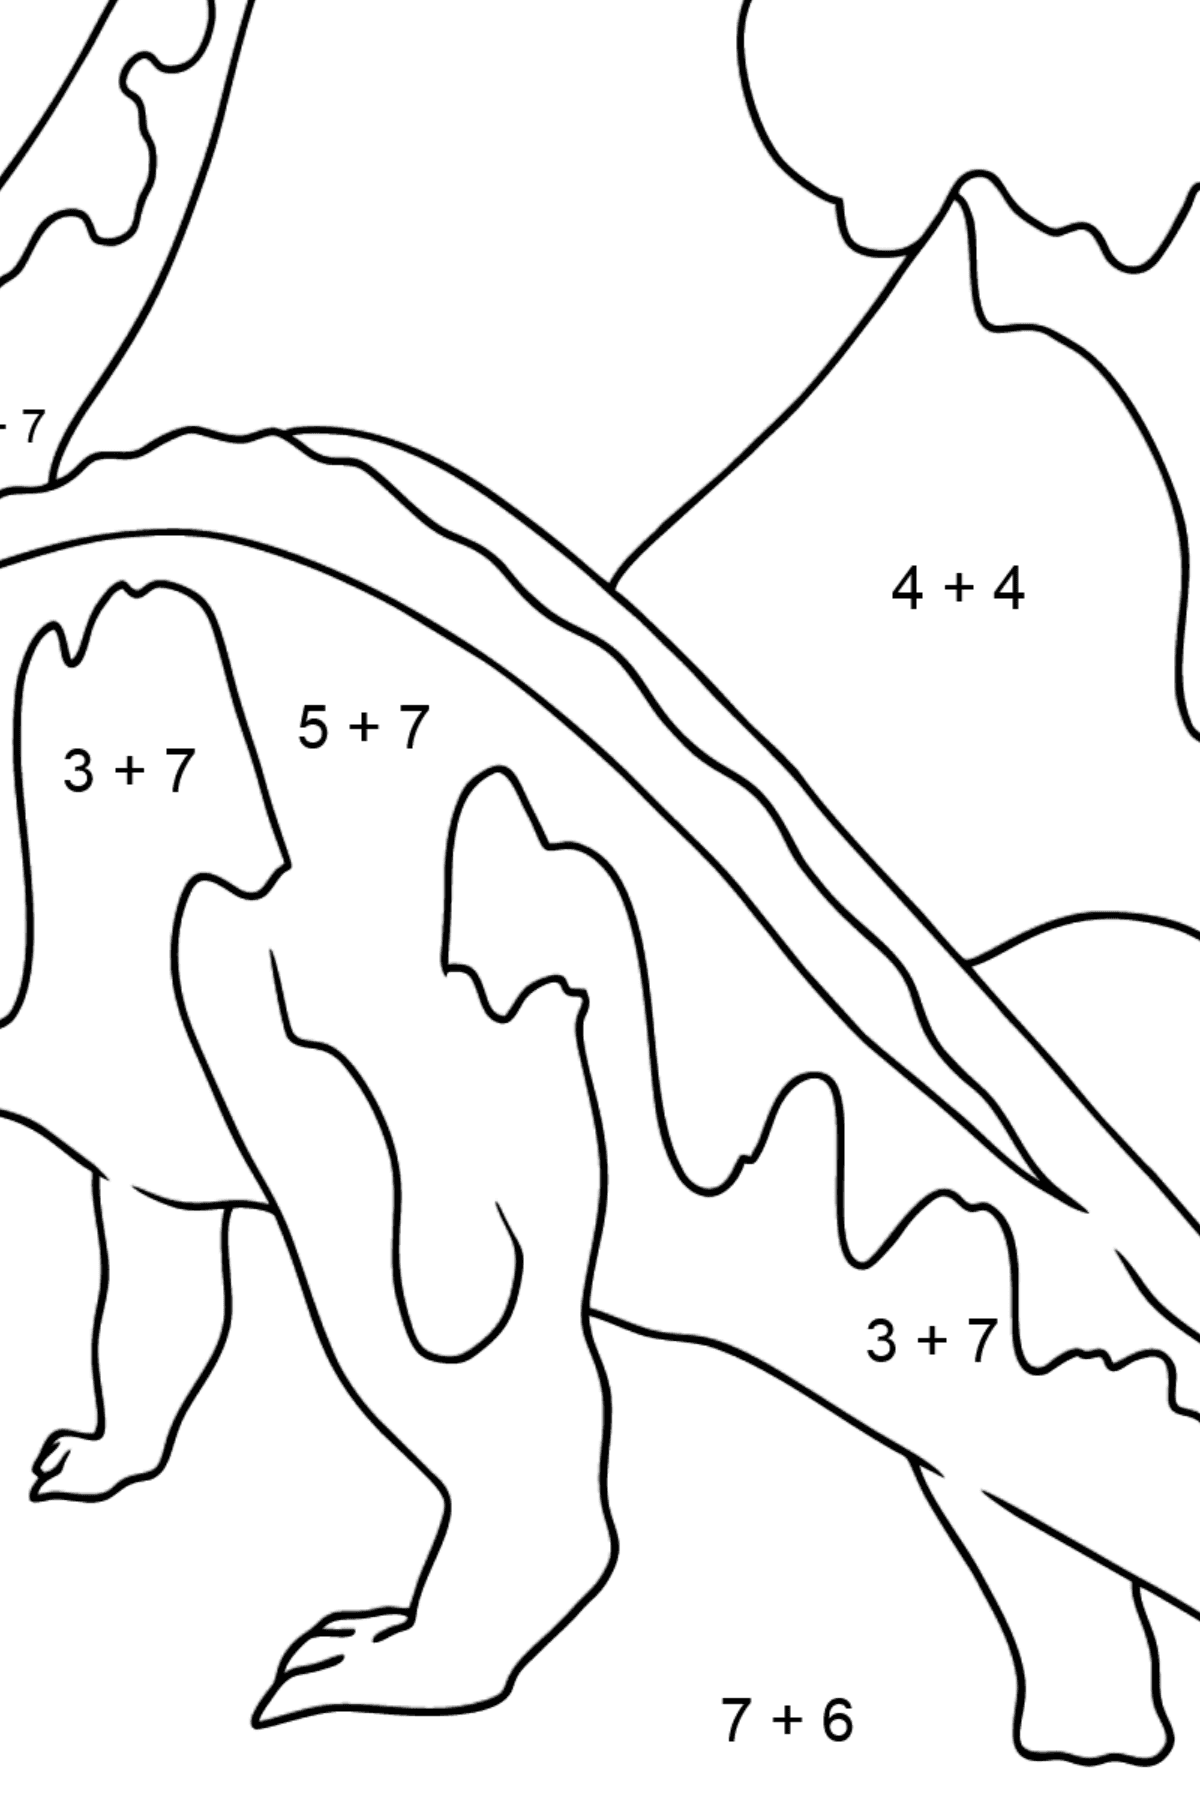 Brontosaurus Coloring Page - Math Coloring - Addition for Kids